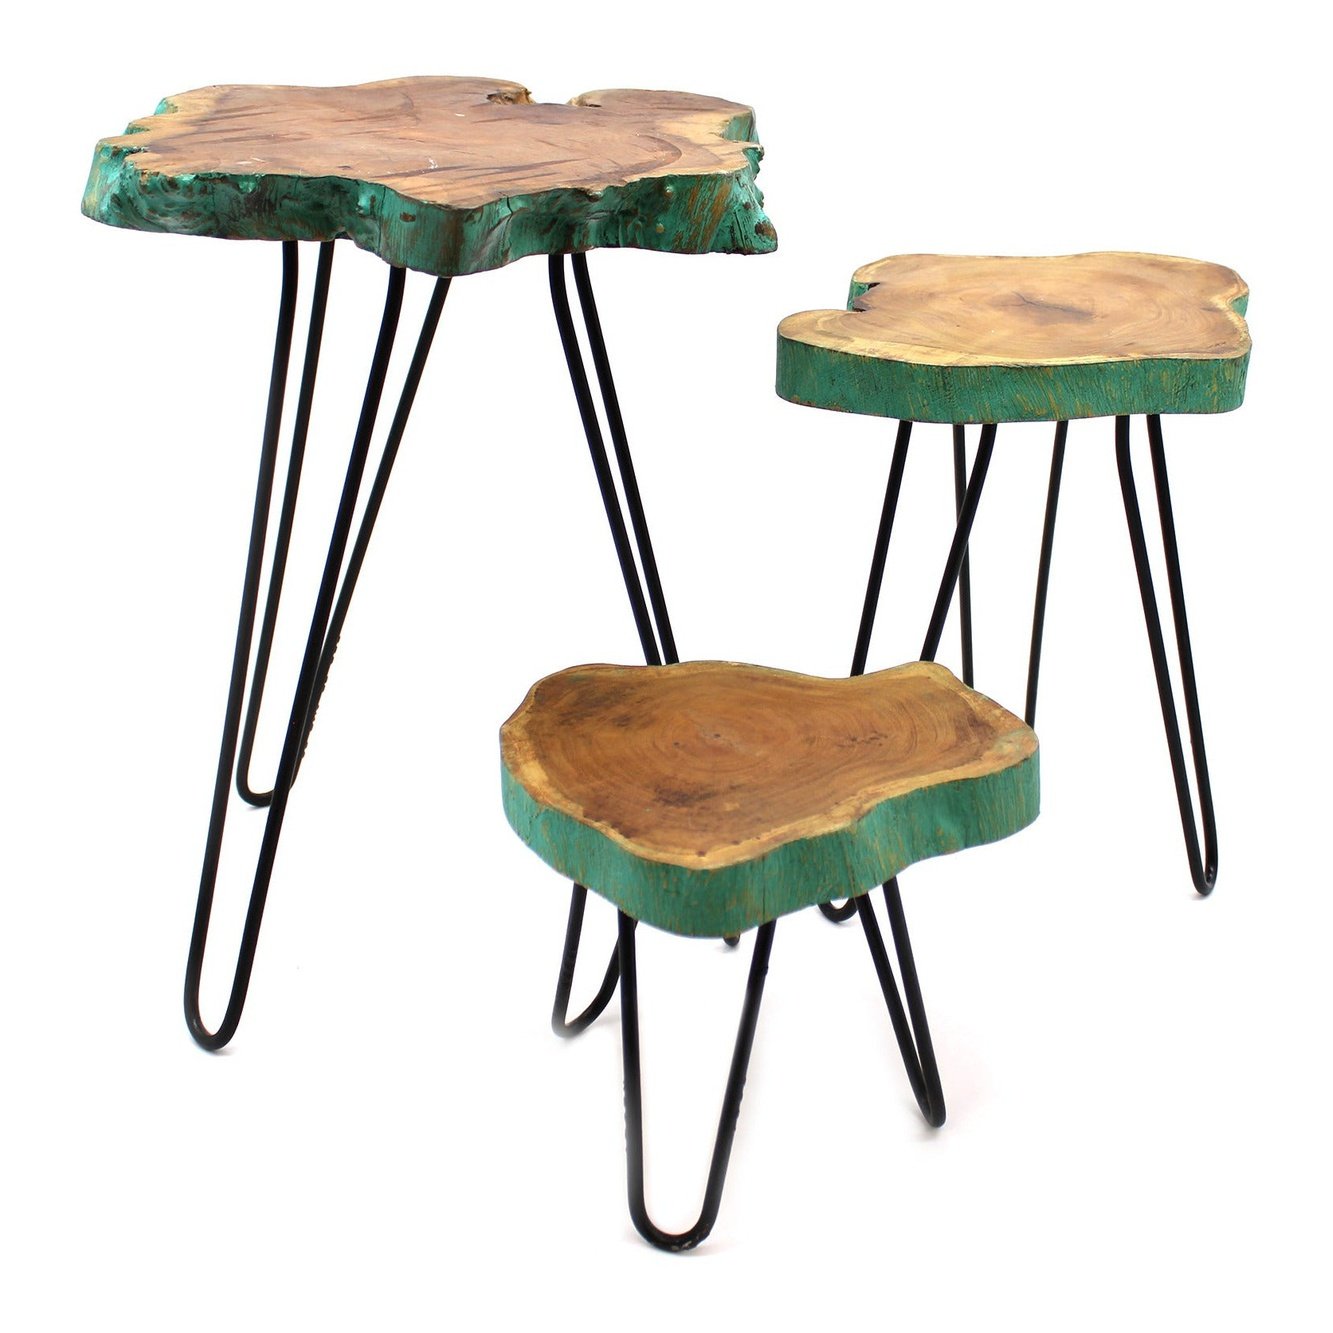 Set of 3 Wood Plant Stands